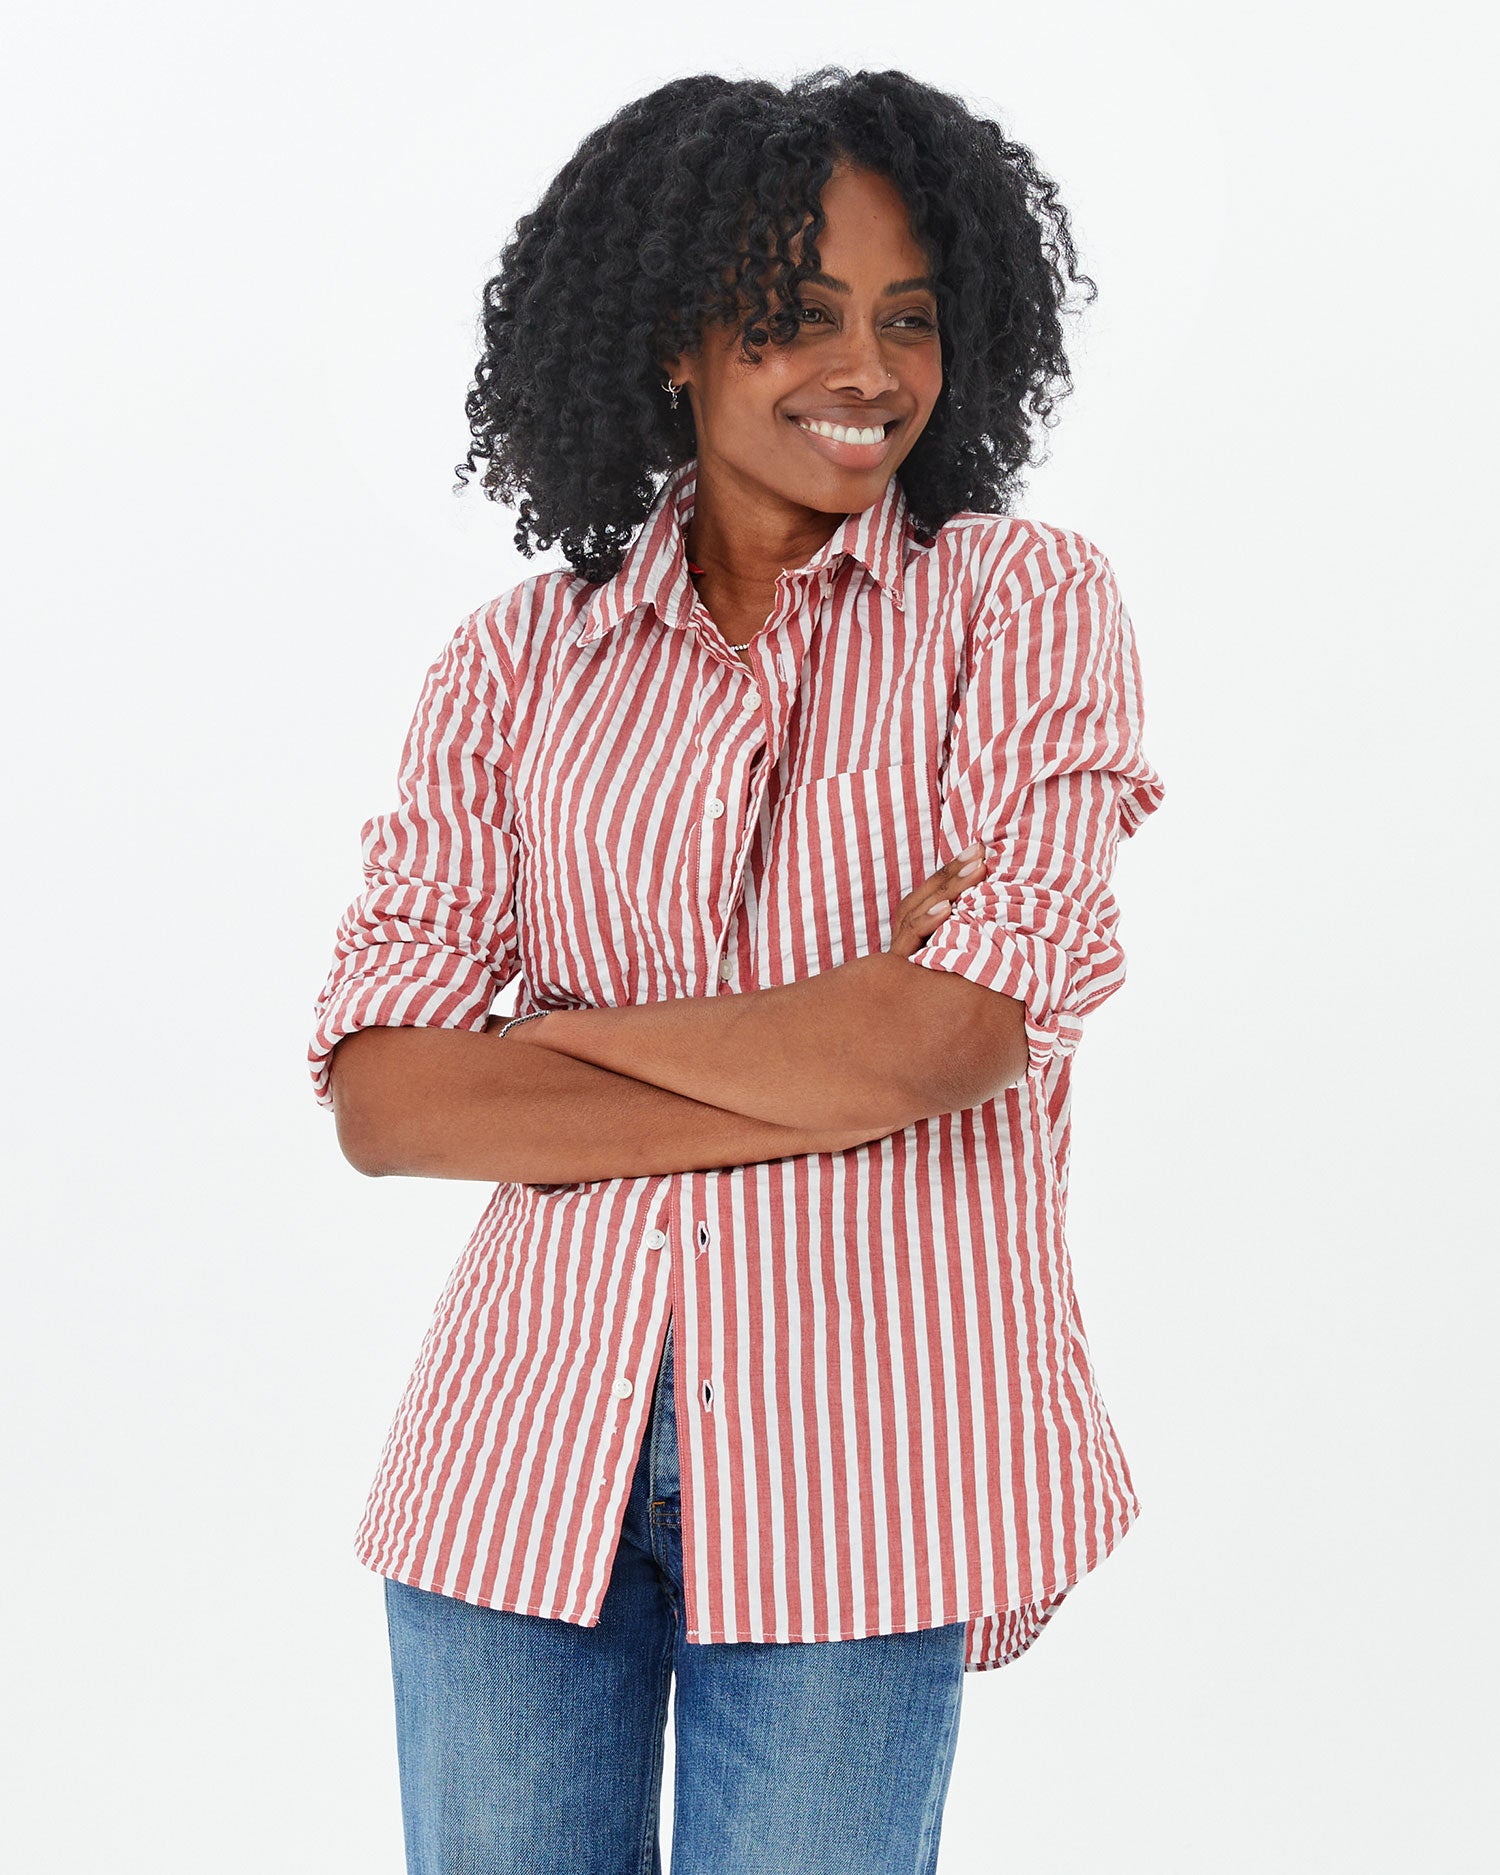 mecca in the  Poppy & cream Stripe Single Needle Shirt and jeans with her arms folded across her chest